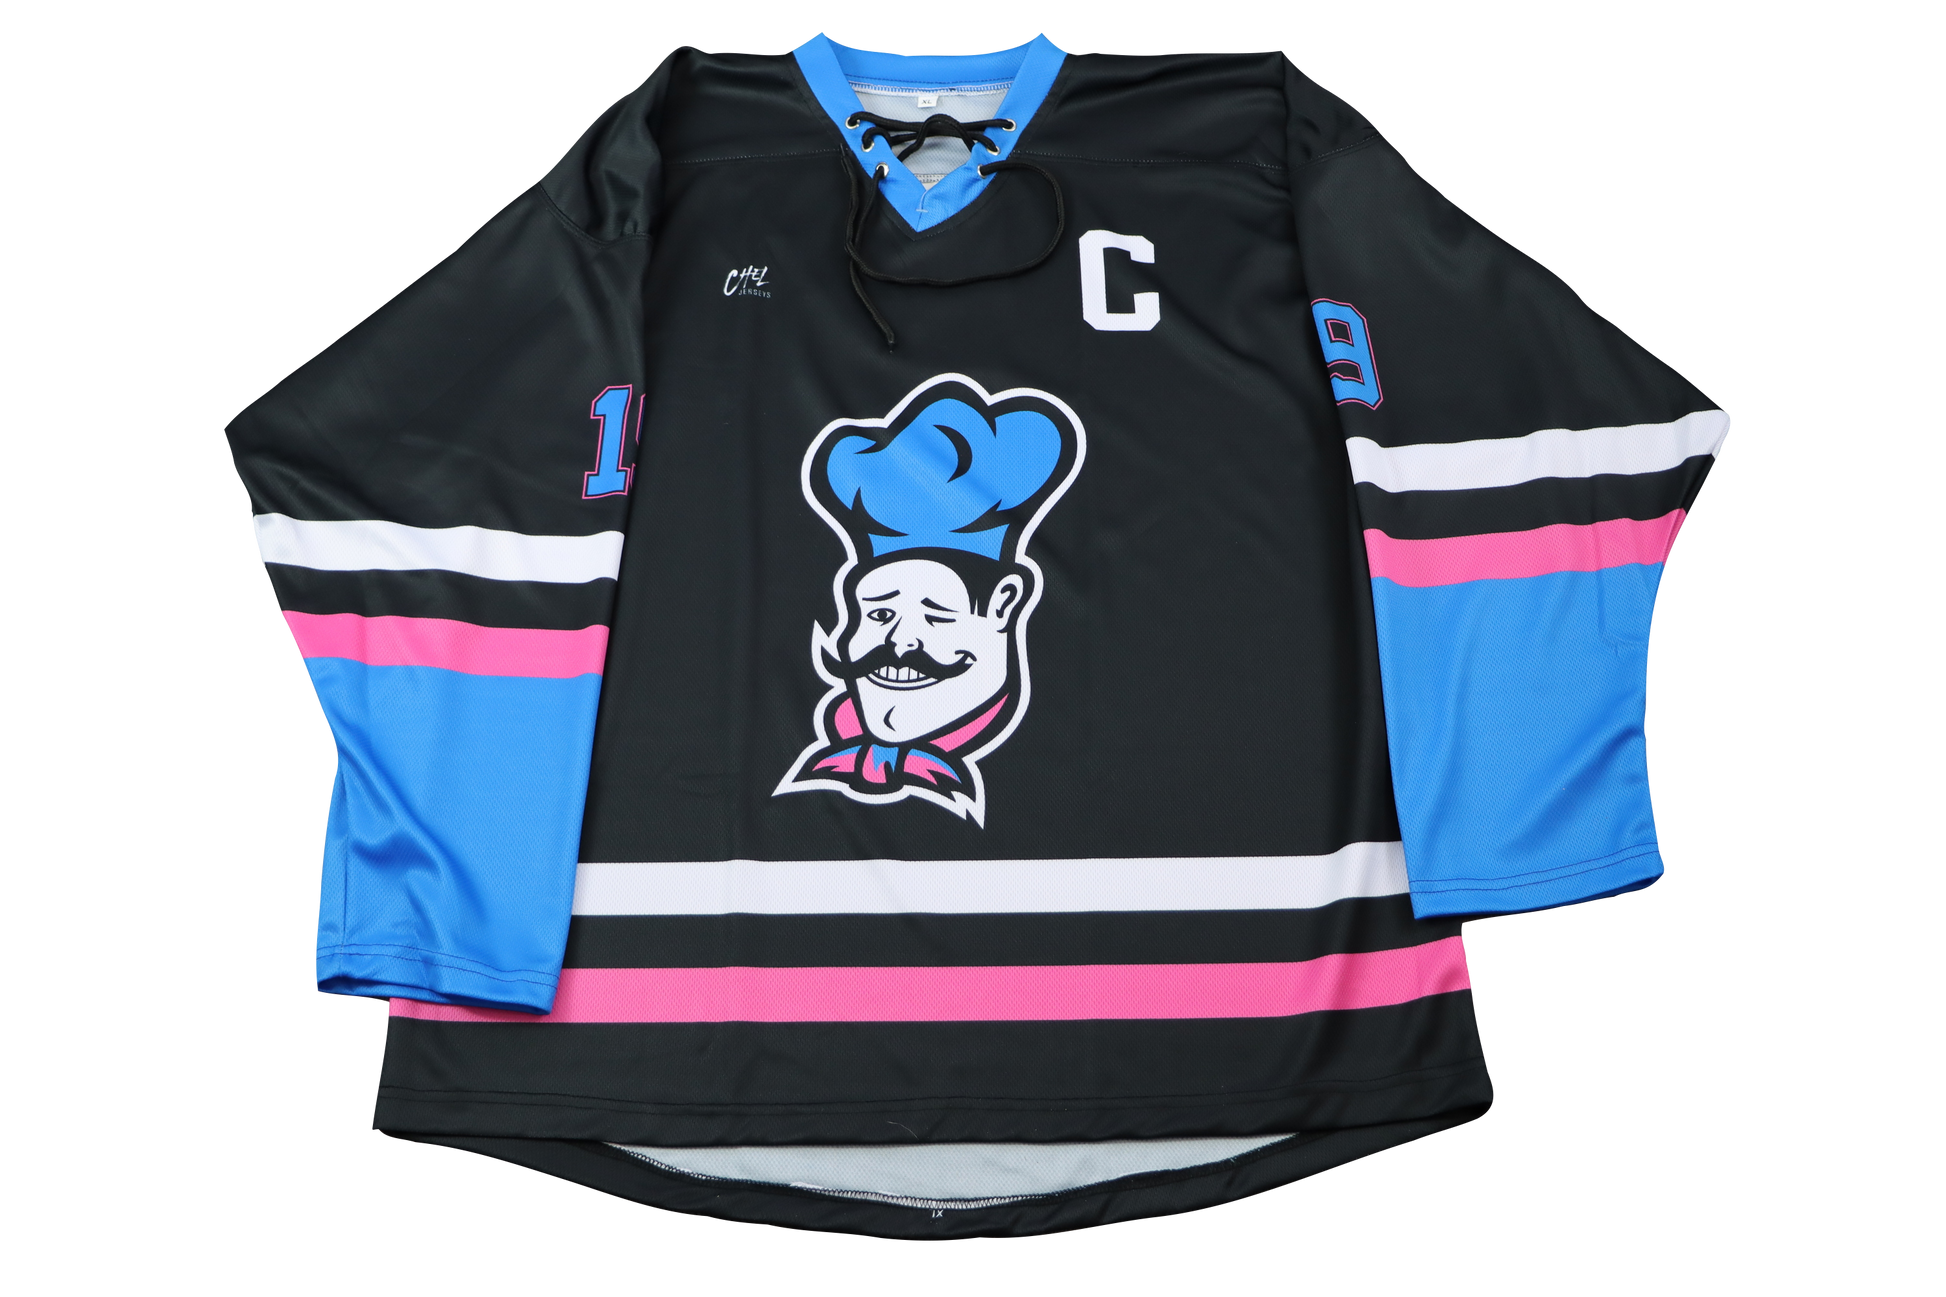 How about an EASHL mailday? Got my team's Chel jerseys created in